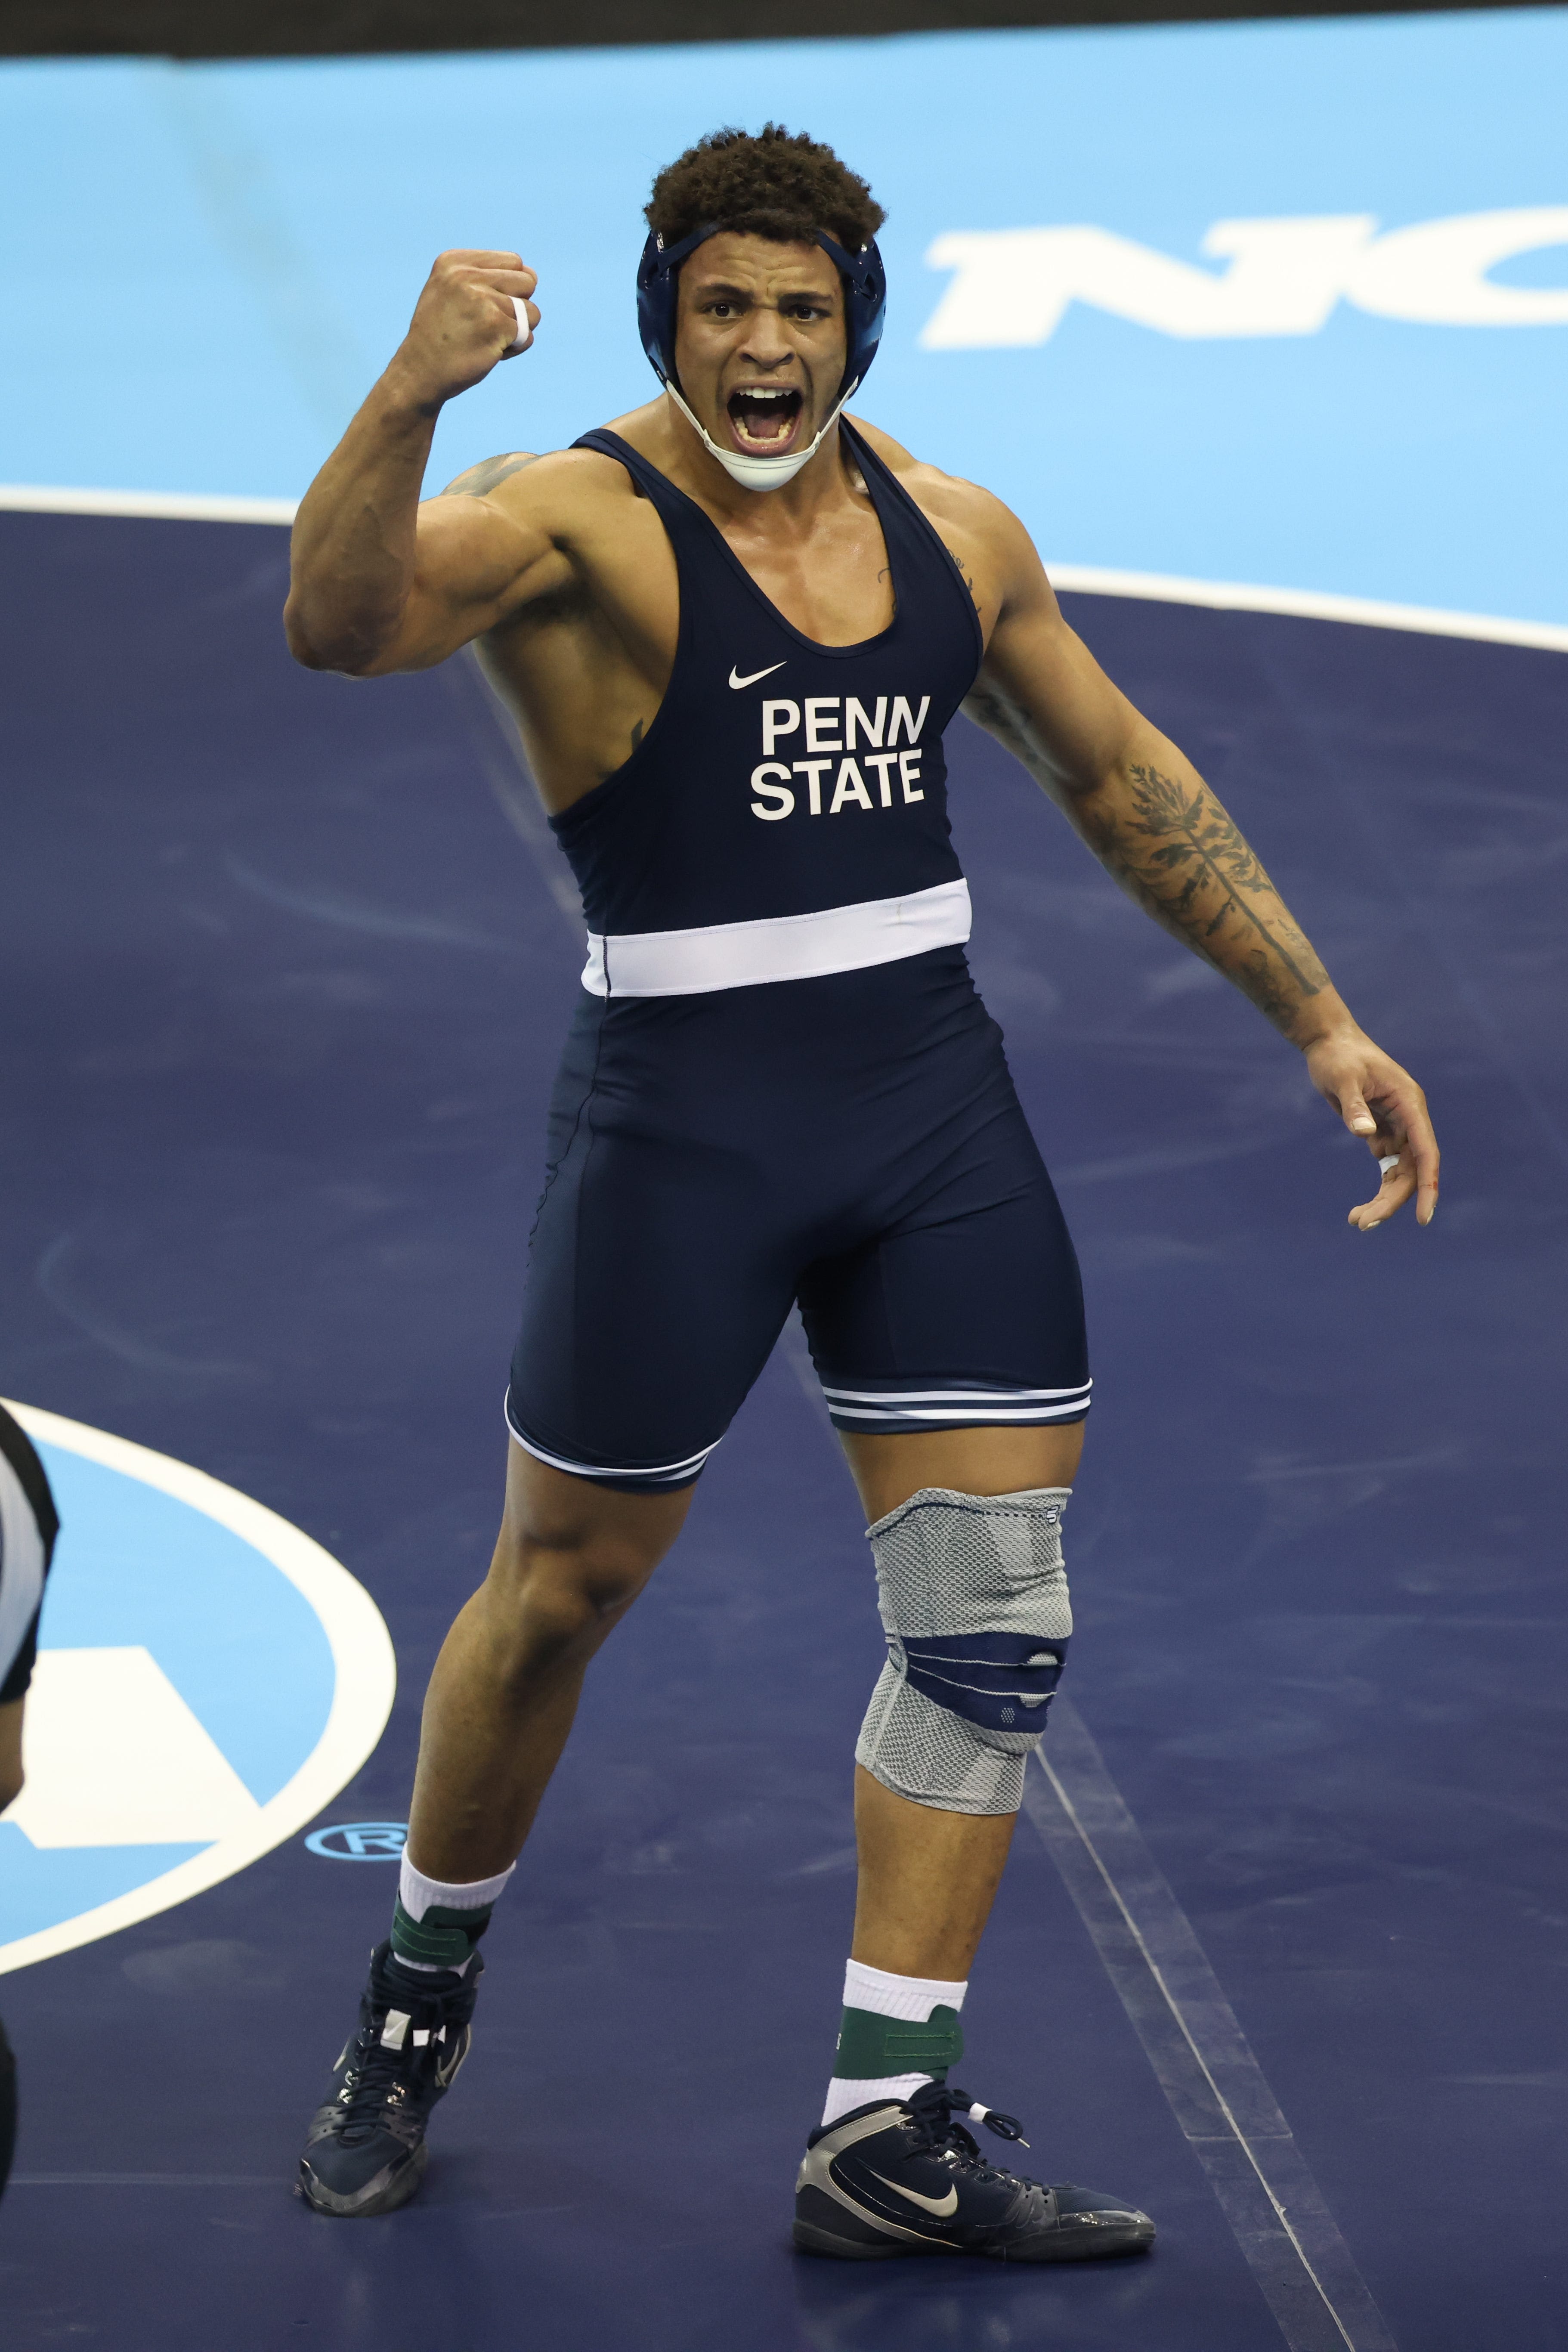 Another champion returns: Can record-breaking Penn State wrestling be even better?